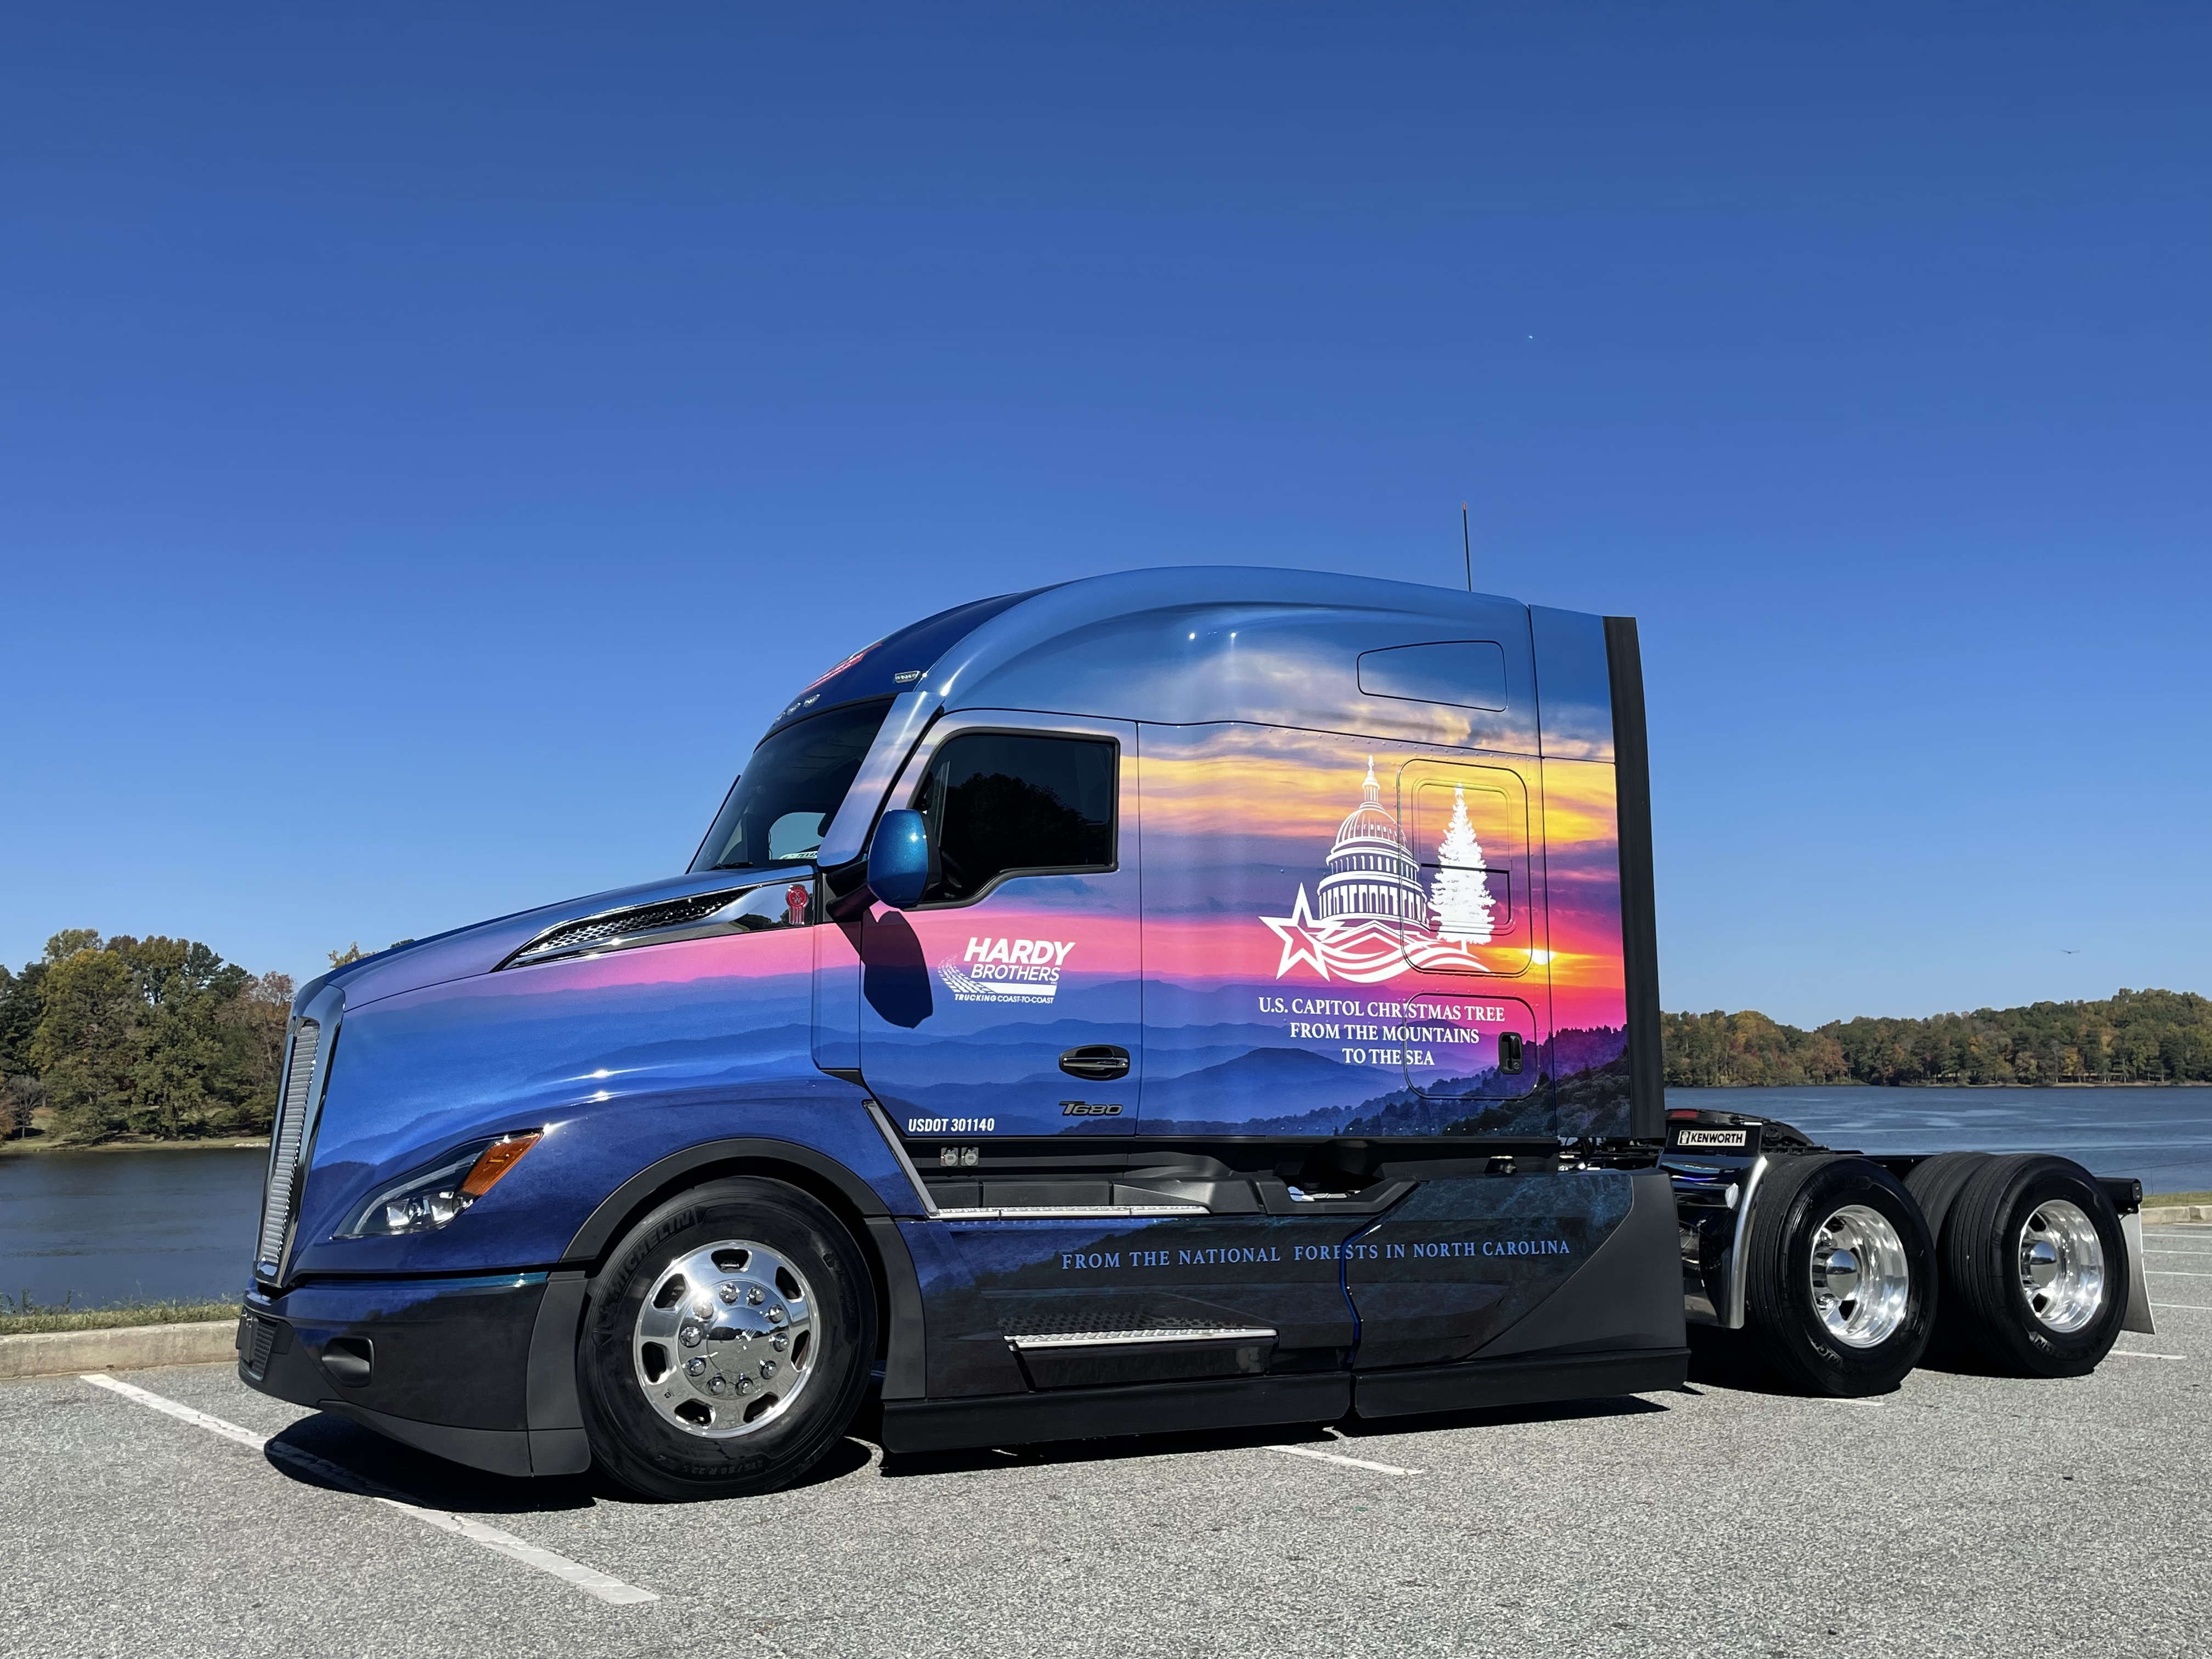 Kenworth T680 Next Generation Features Special Design for 2022 U.S. Capitol Christmas Tree Tour